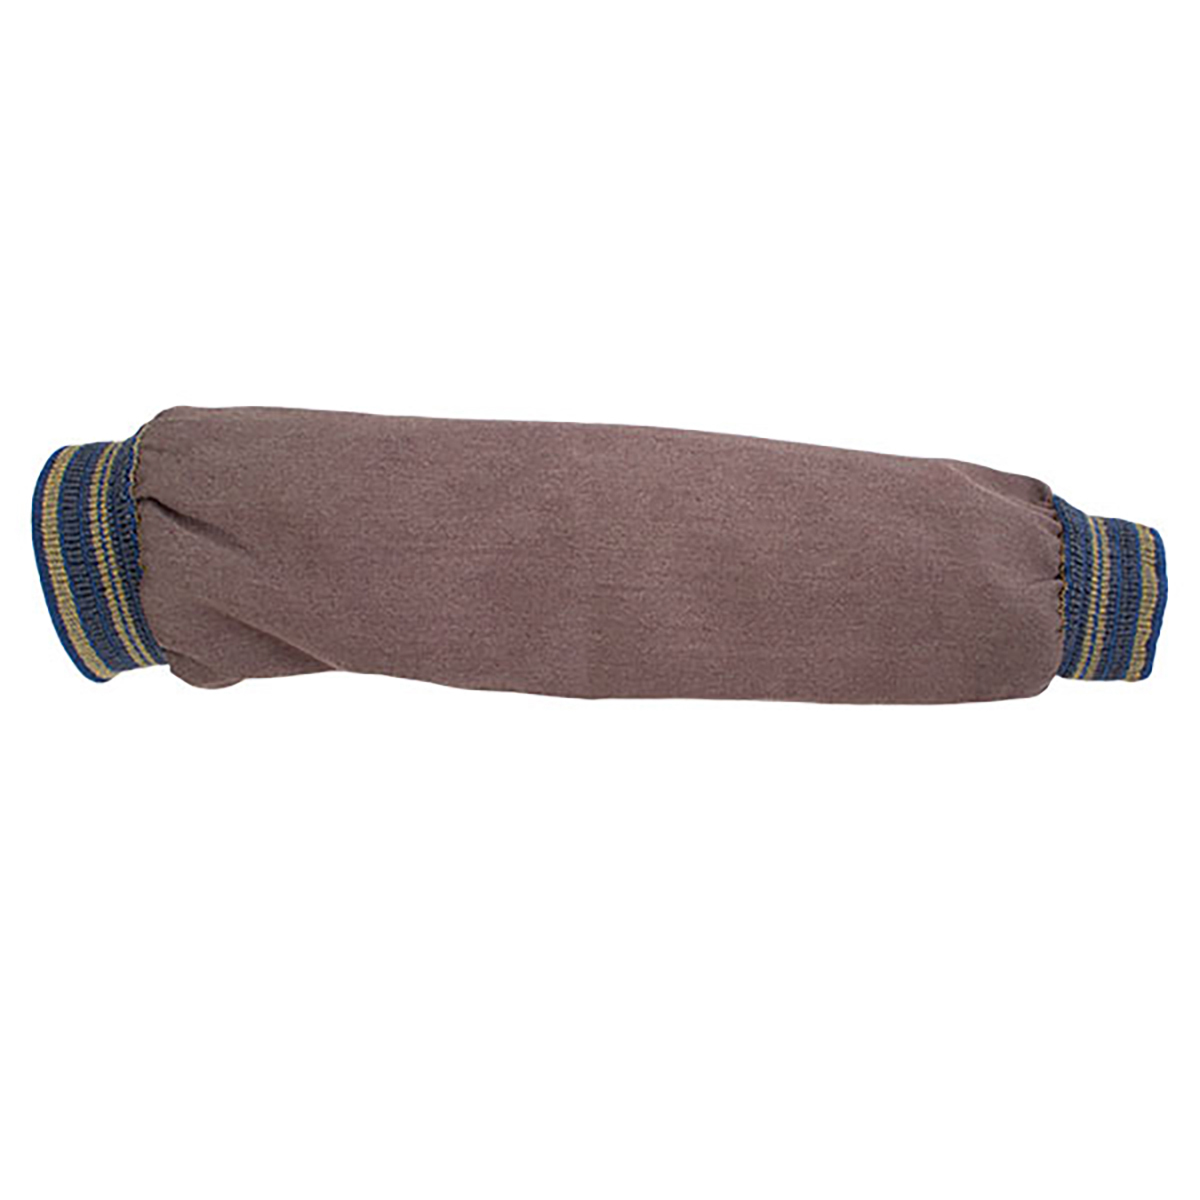 National Safety Apparel Regular Brown Twaron Blend Flame Resistant Welding Sleeve With Blue Elastic On Both Ends